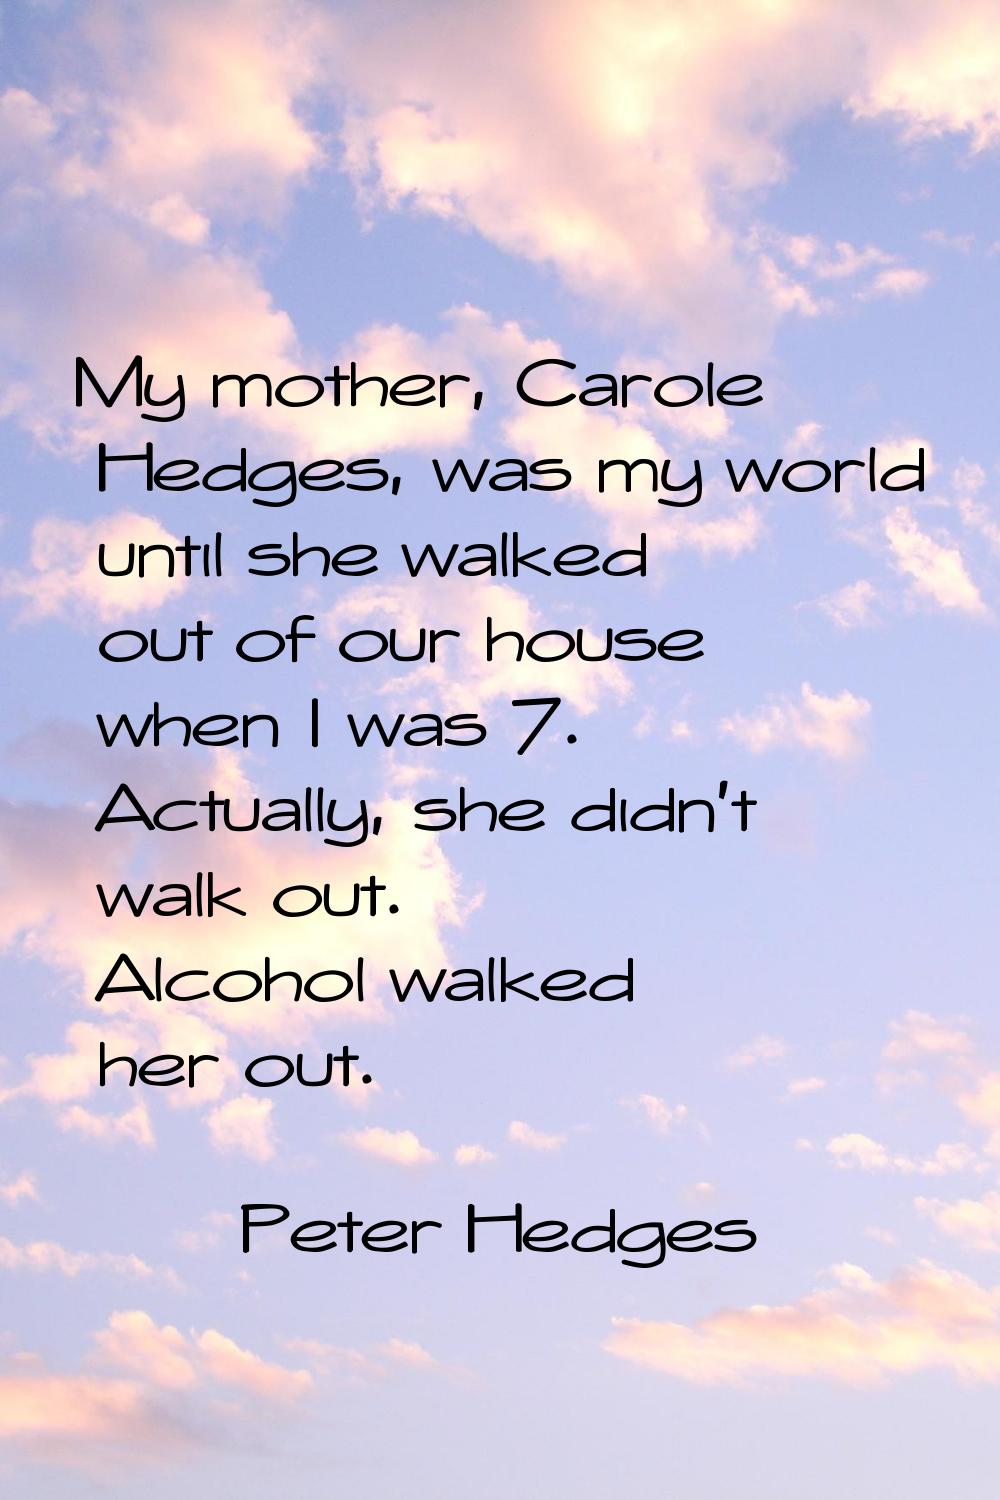 My mother, Carole Hedges, was my world until she walked out of our house when I was 7. Actually, sh